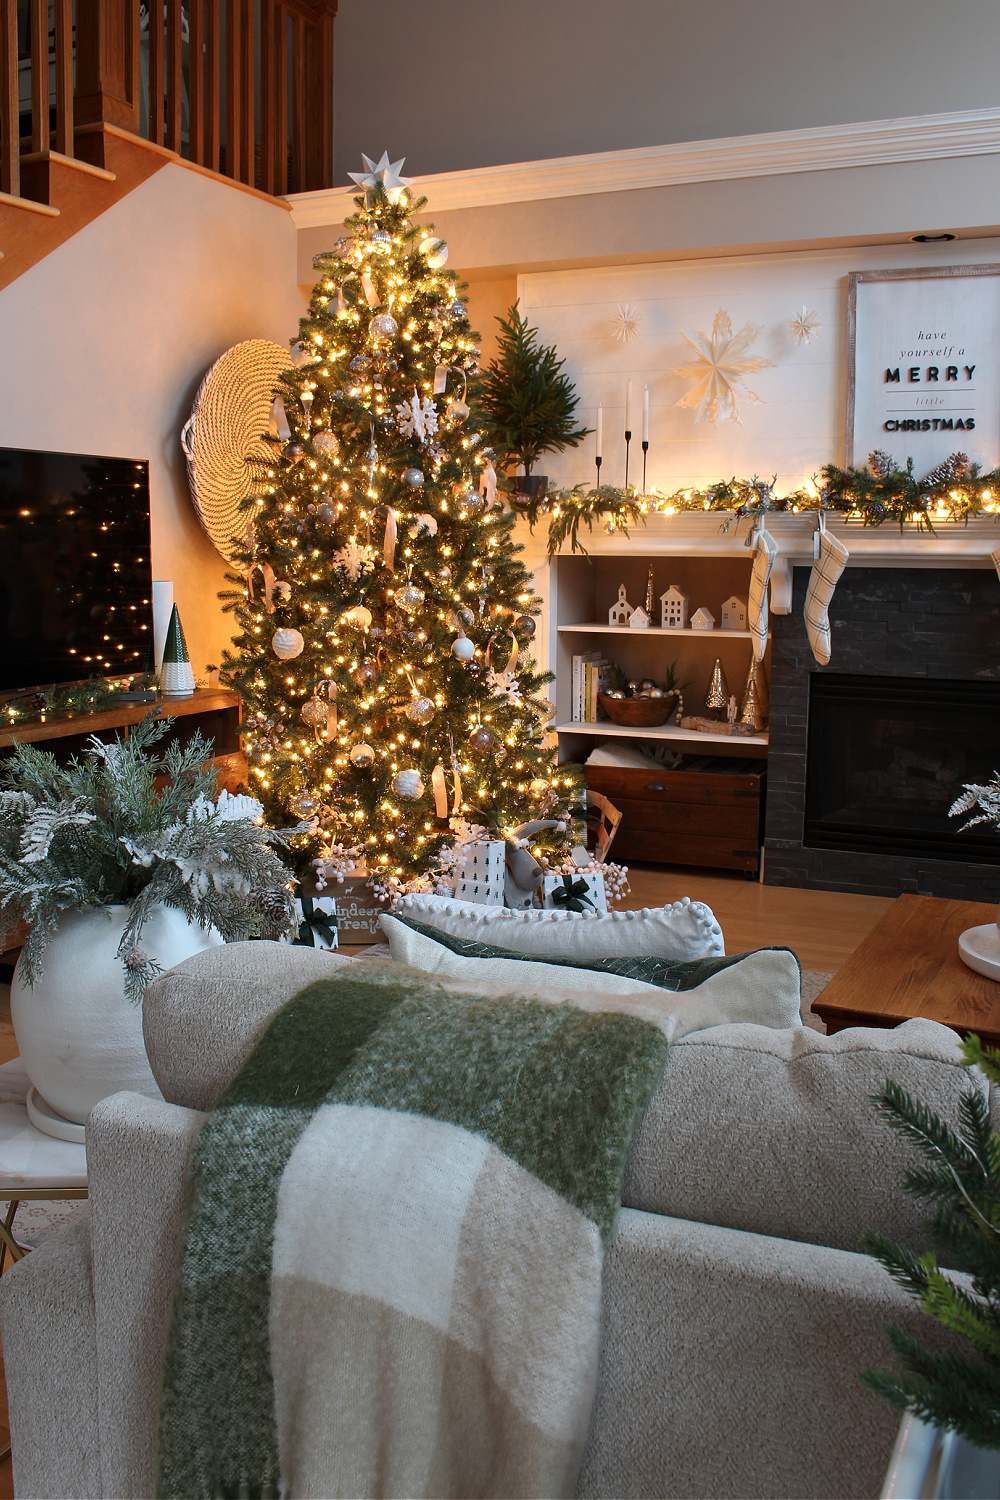 Living room decorated for Christmas with green and white.